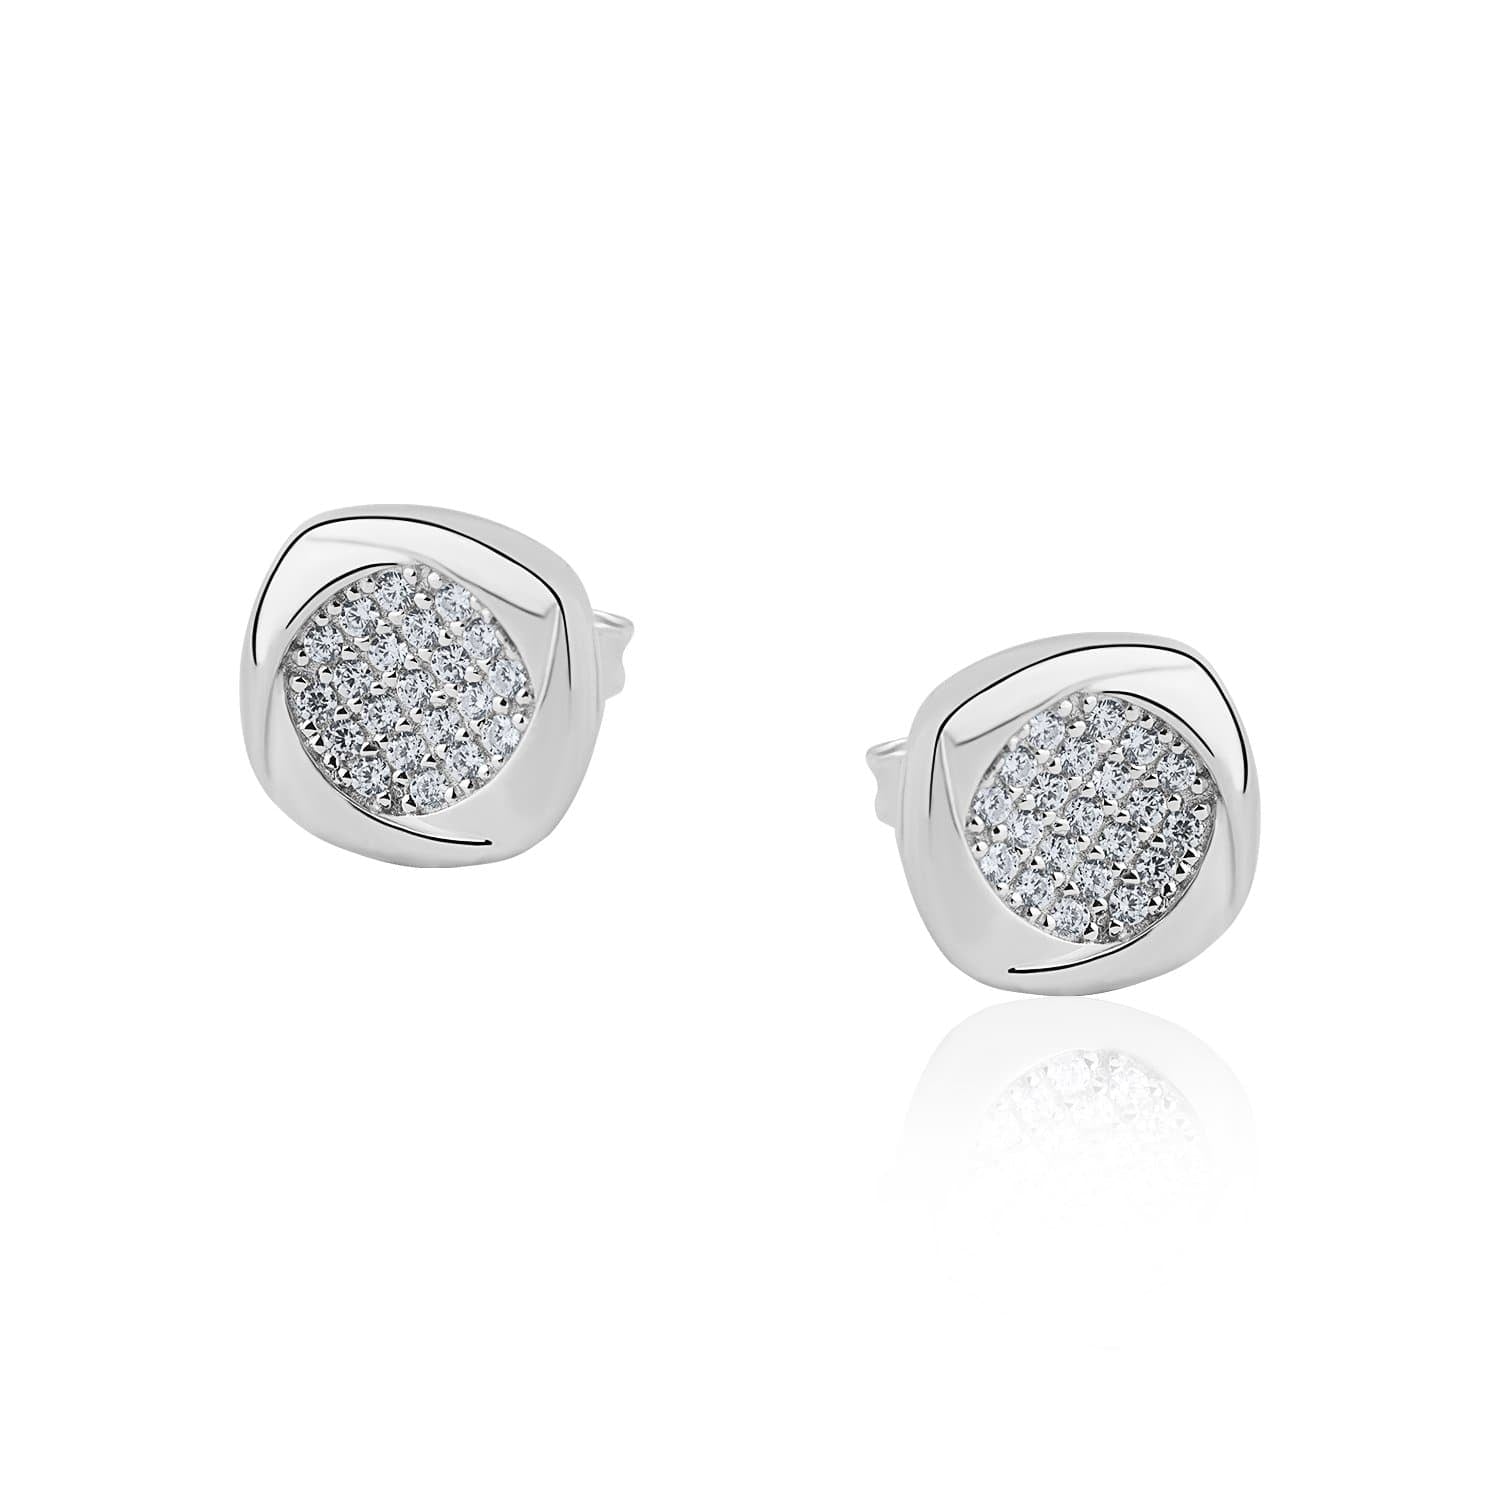 Lynora Jewellery Earring Sterling Silver Micro Pave Studs Sterling Silver